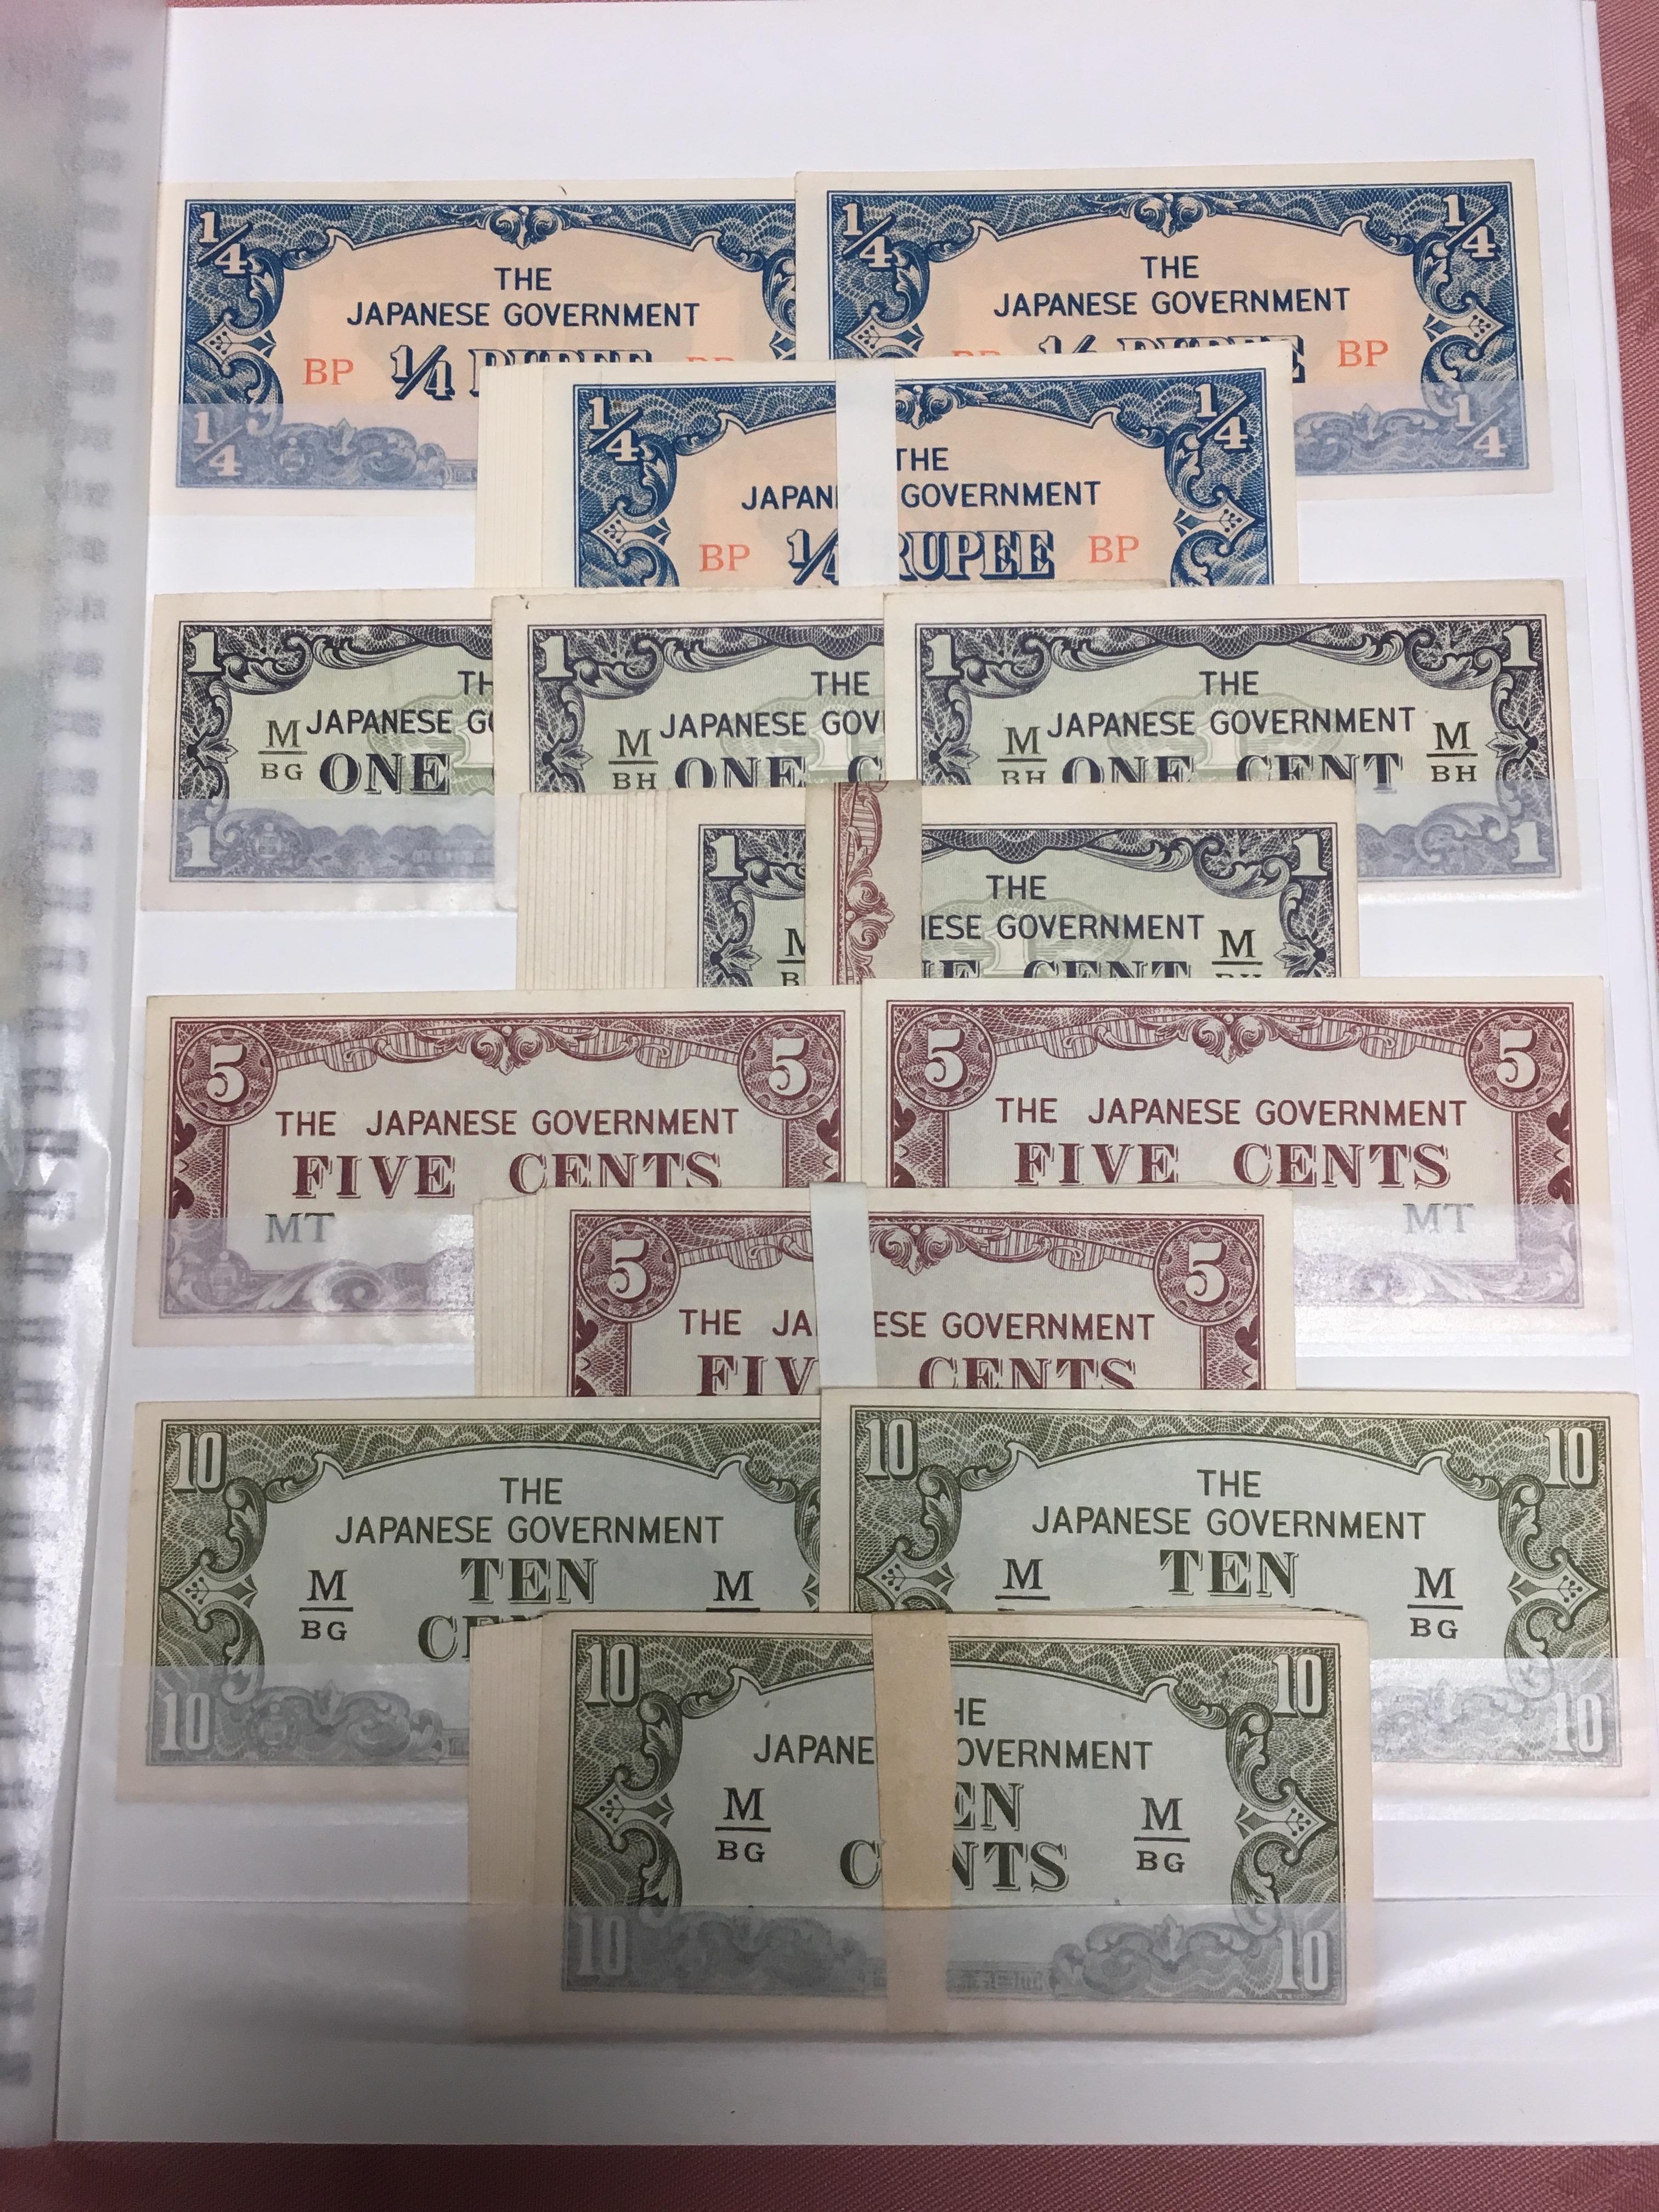 BANKNOTES: WW2 JAPANESE GOVERNMENT, VARIOUS DENOMINATIONS WITH DUPLICATION (APPROX. 100) - Image 4 of 4